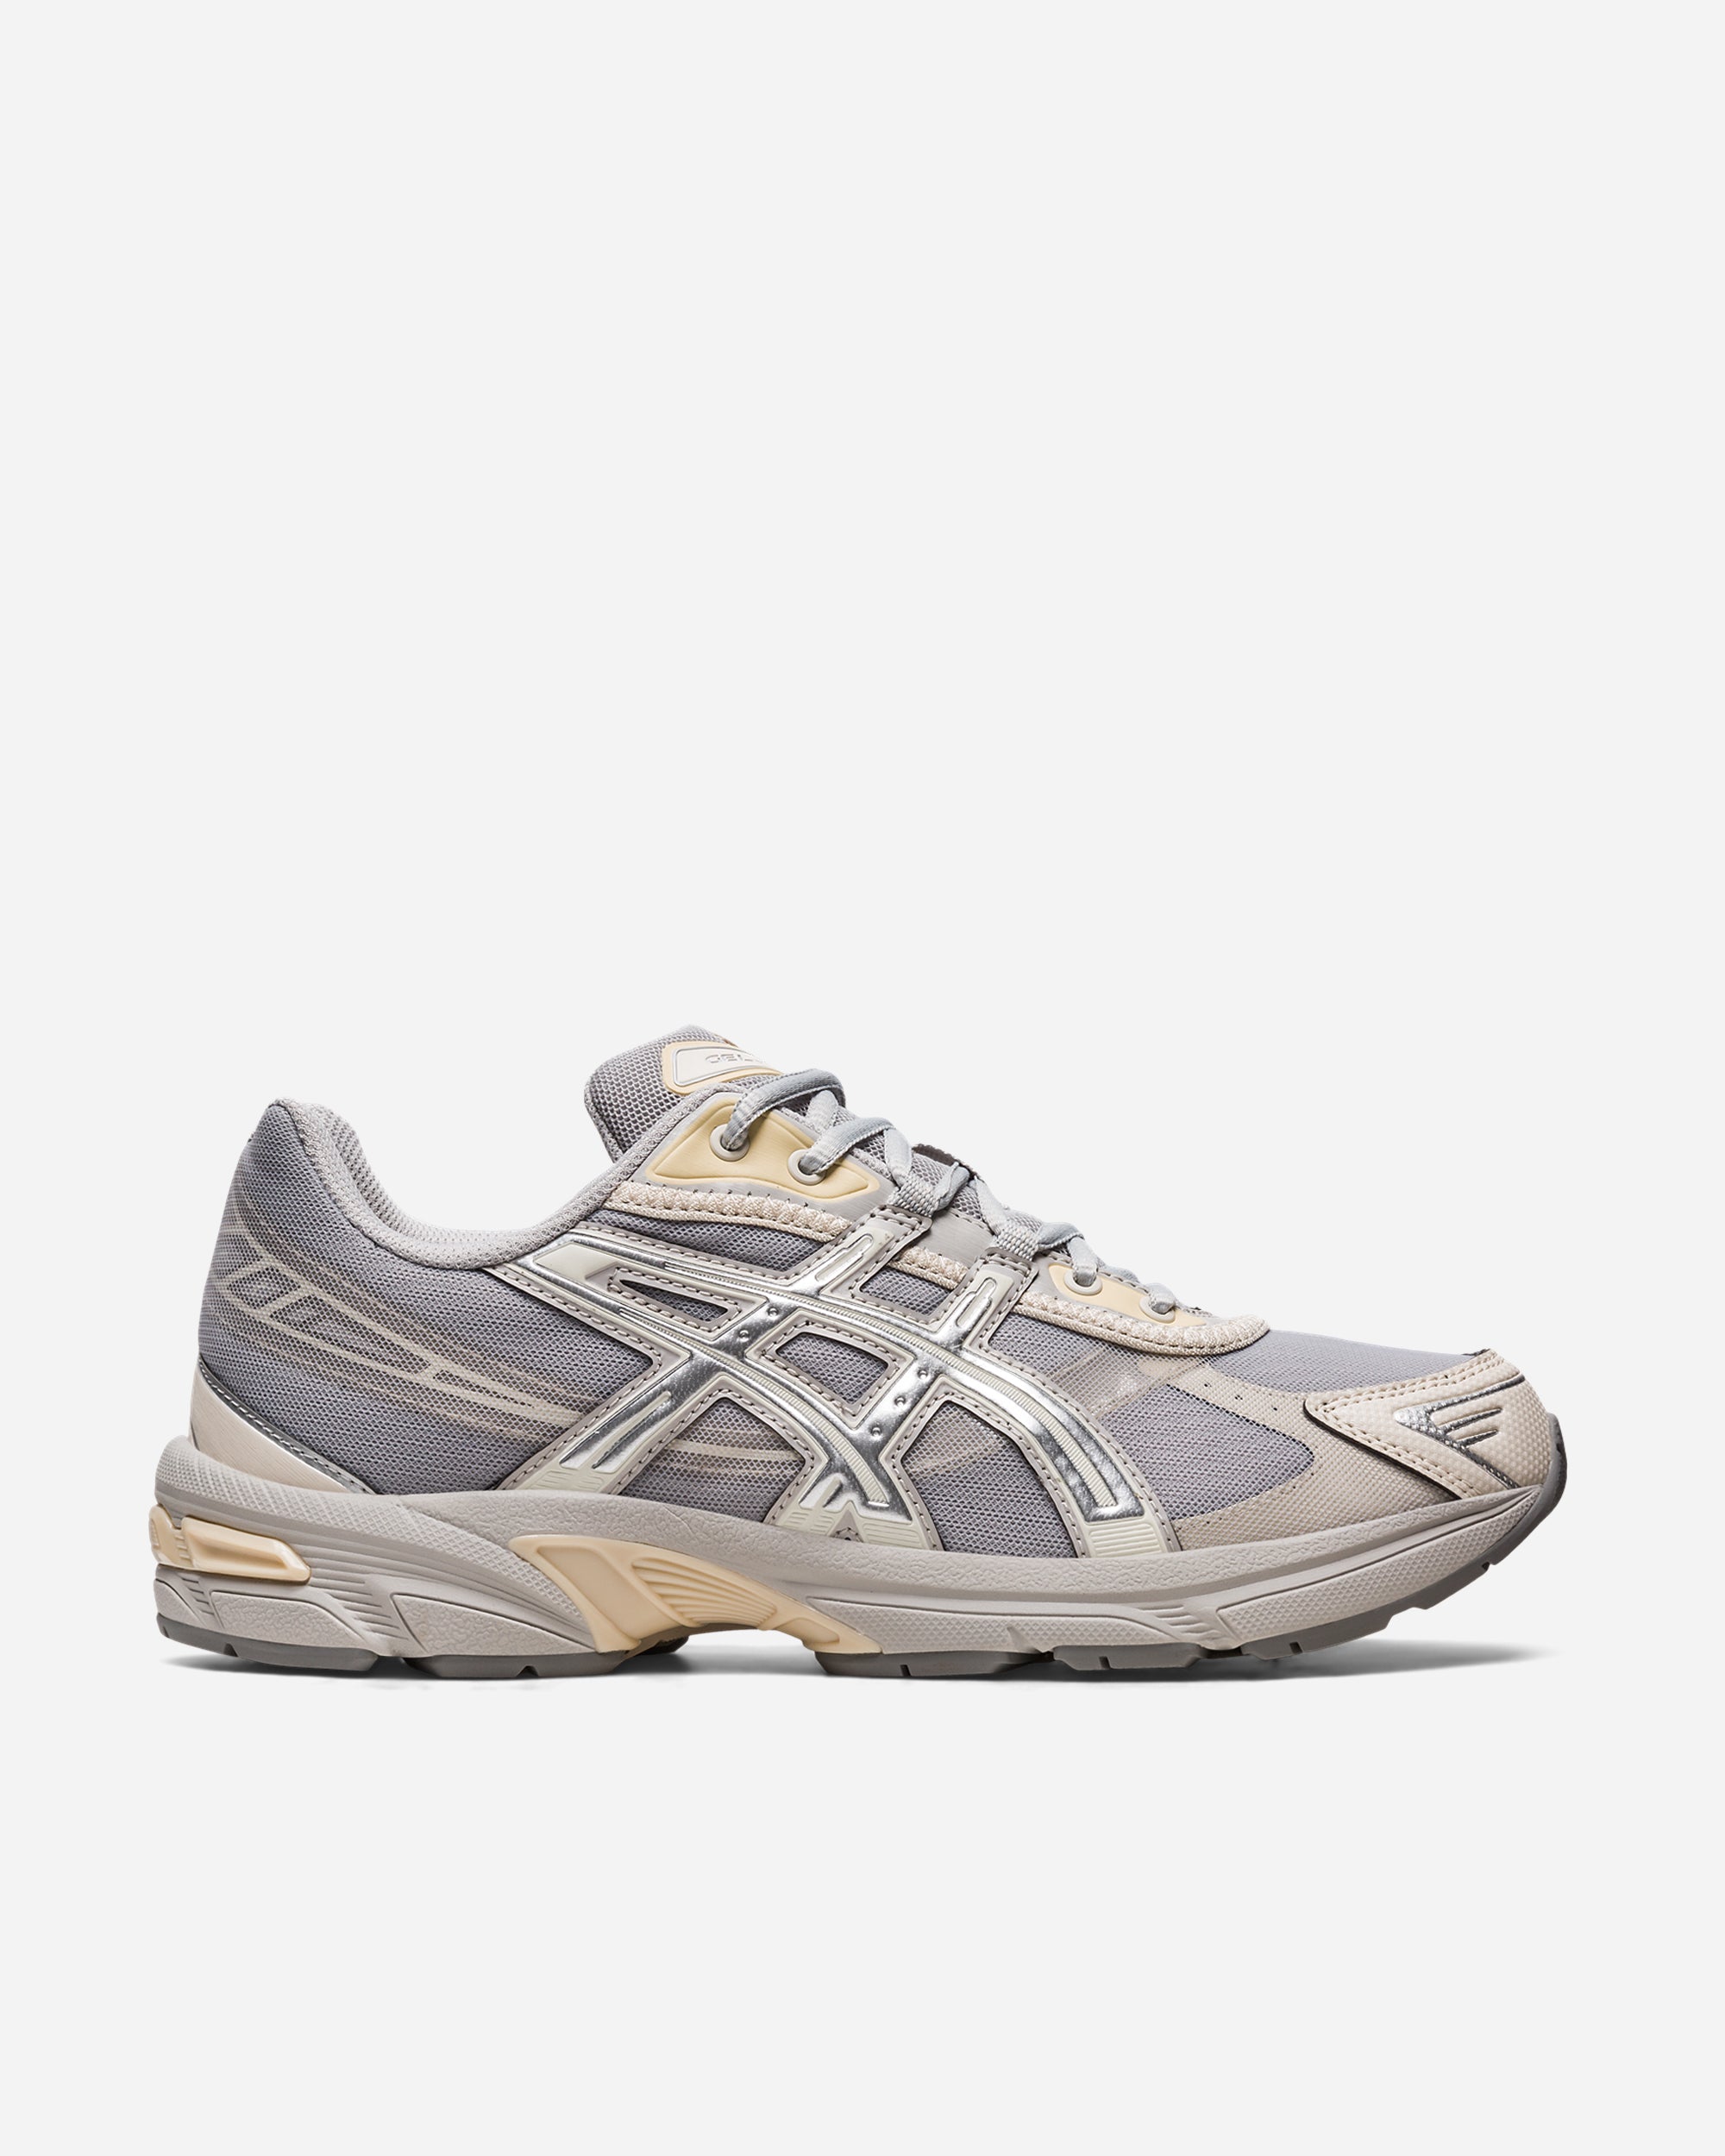 Asics GEL-1130 OYSTER GREY/PURE SILVER 1201A783-021